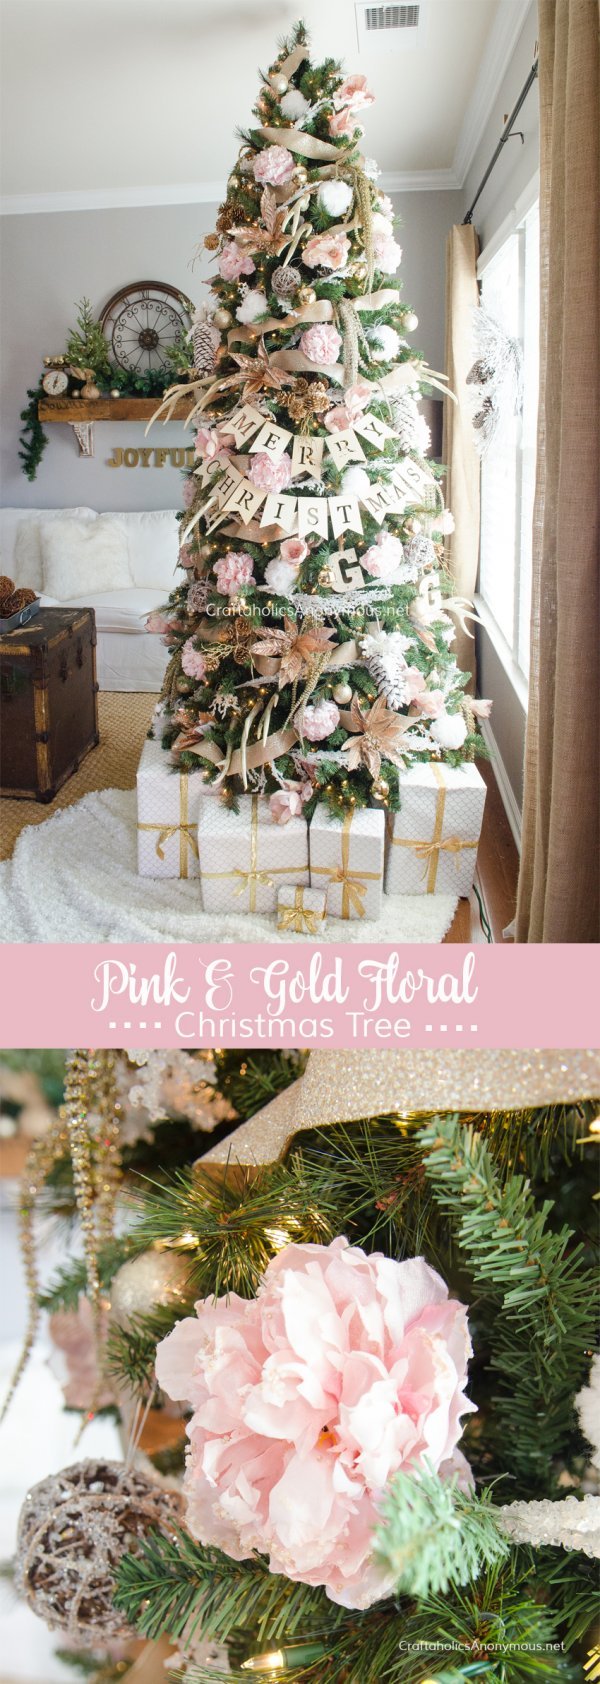 Floral pink and gold Christmas tree.